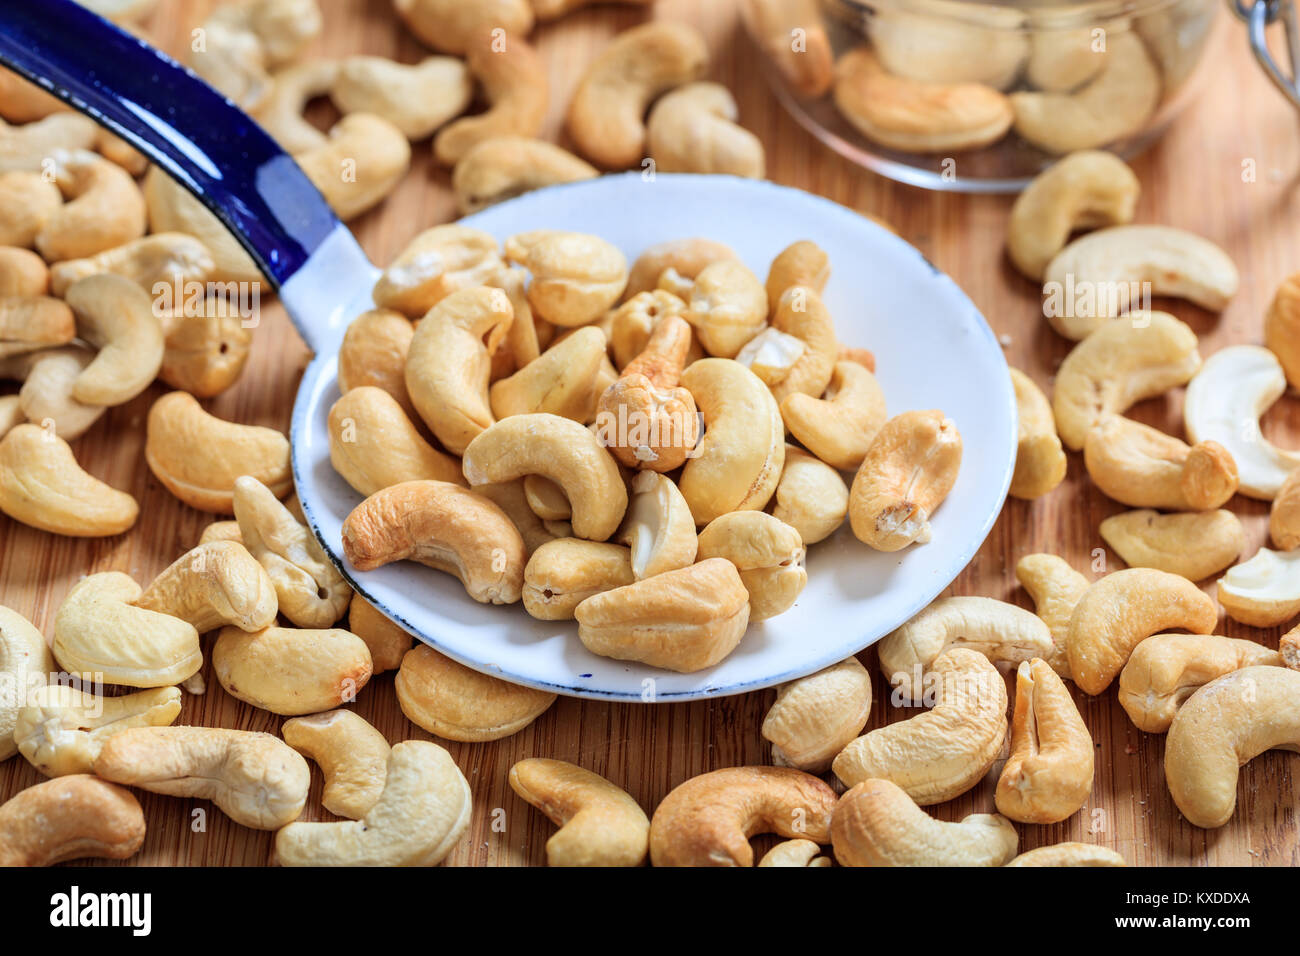 Cashews and an old ladle Stock Photo